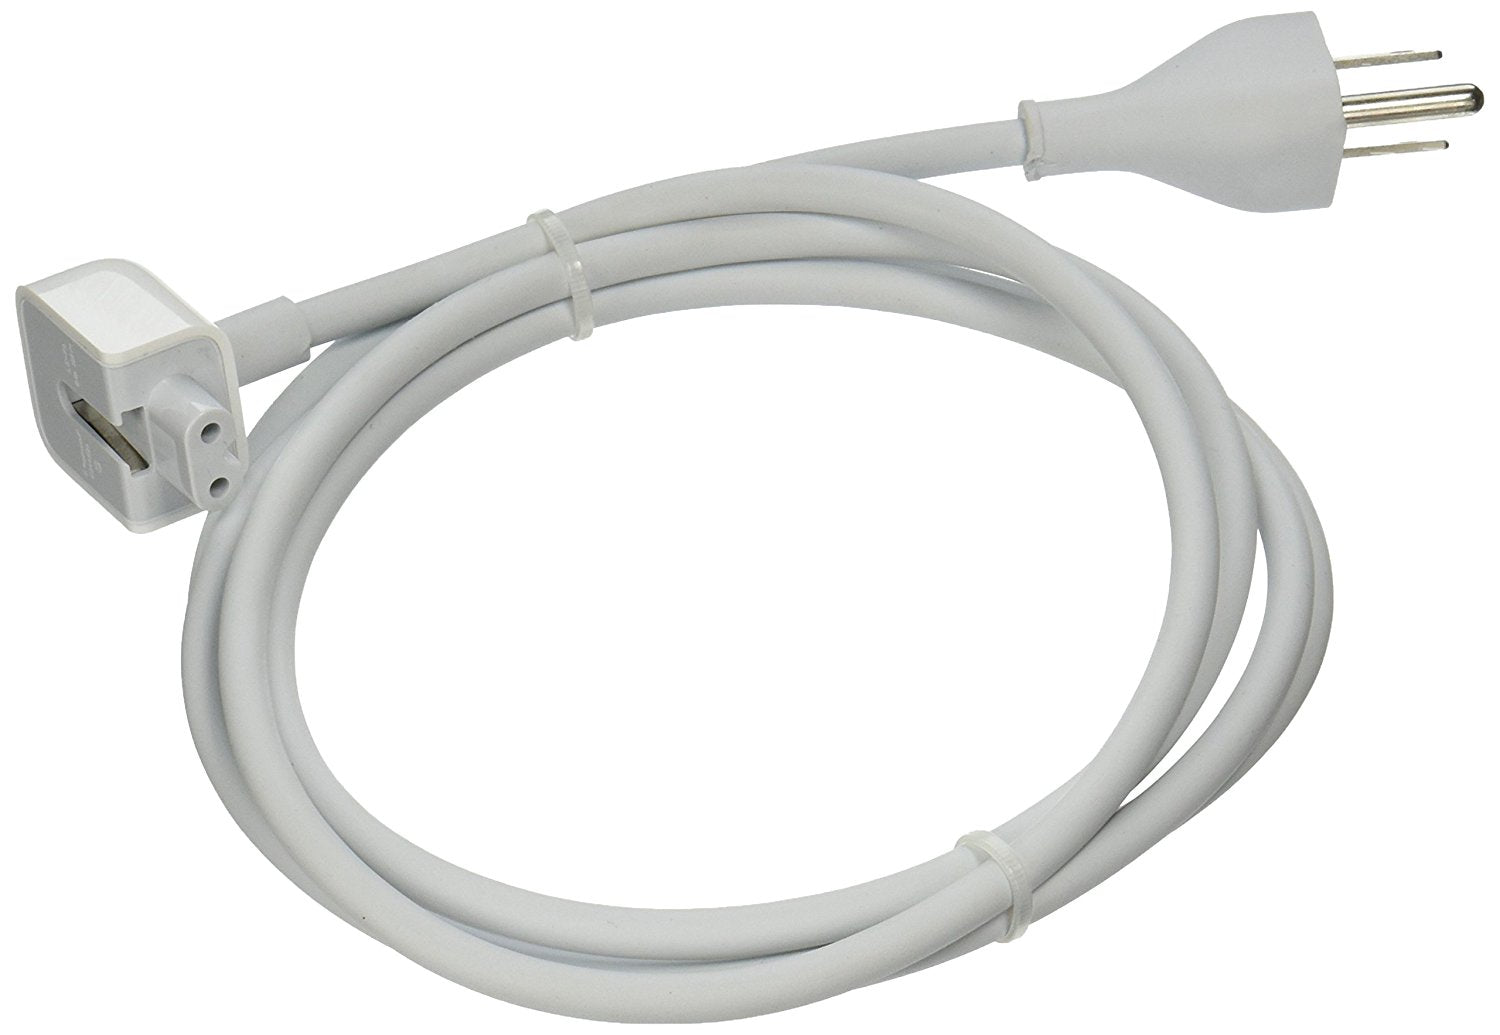 ULTIMAXX Power Extension Wall Cord for Apple Mac iBook Macbook Pro - US Plug